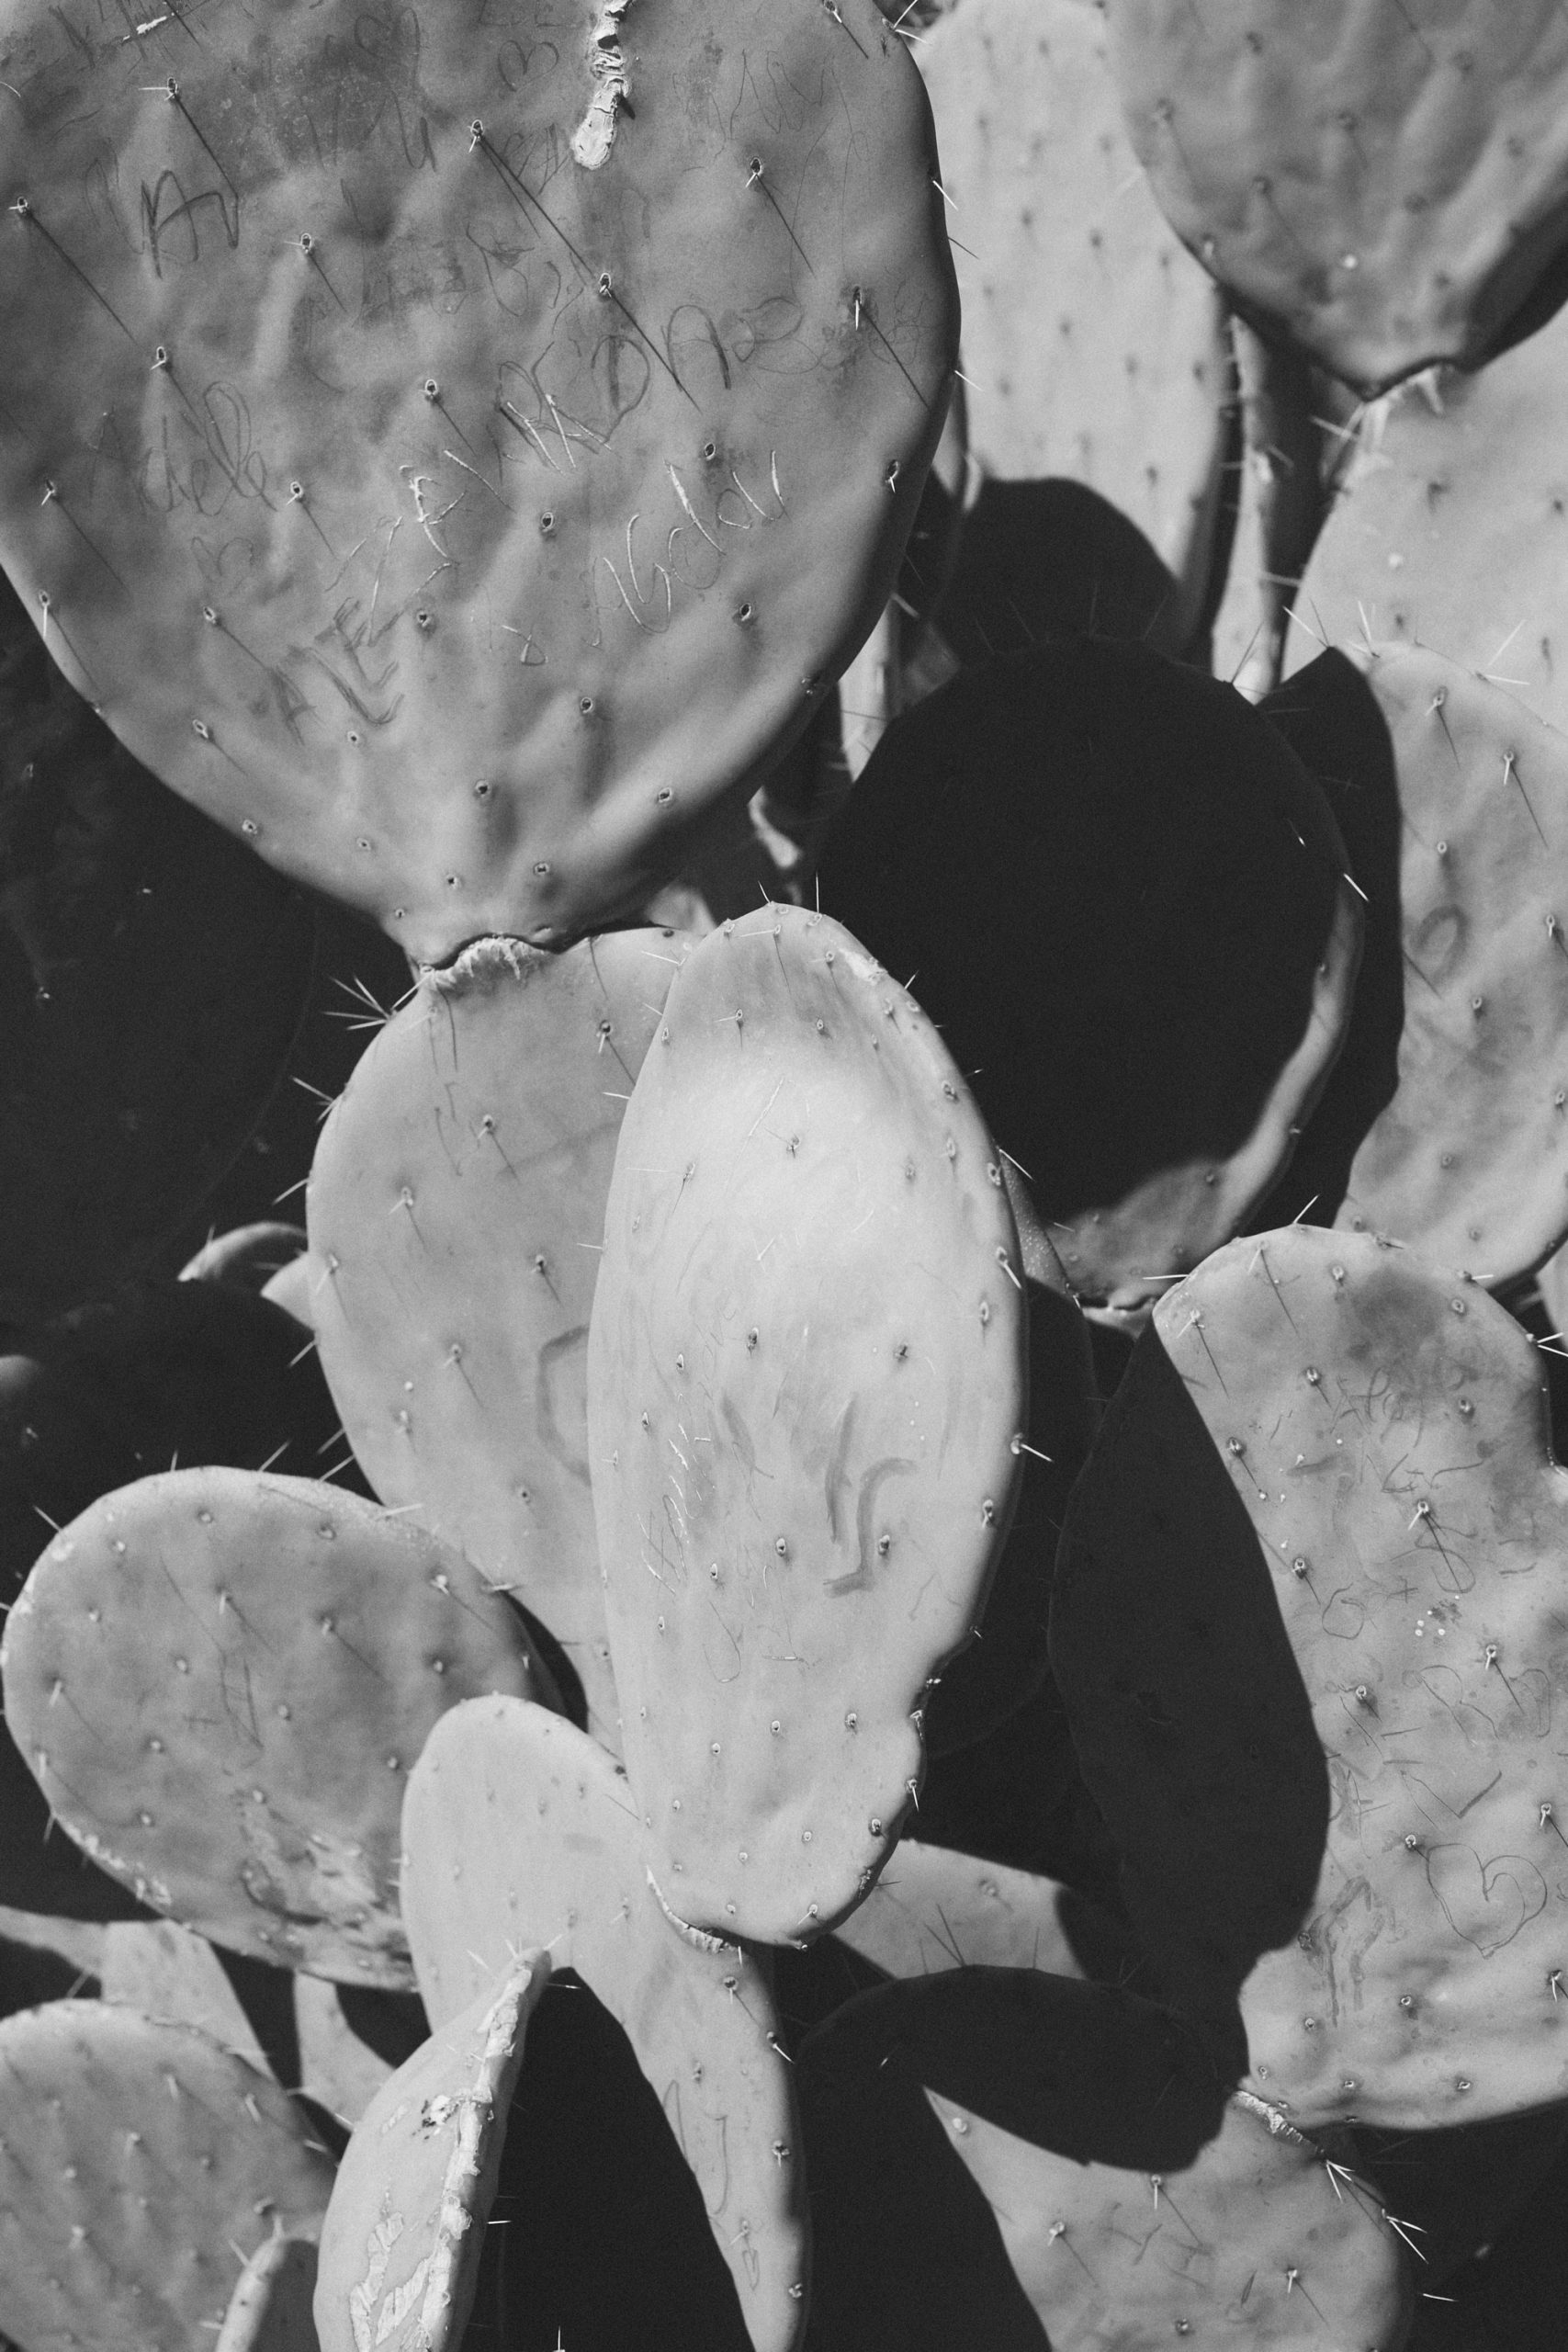 Cactus in black and white